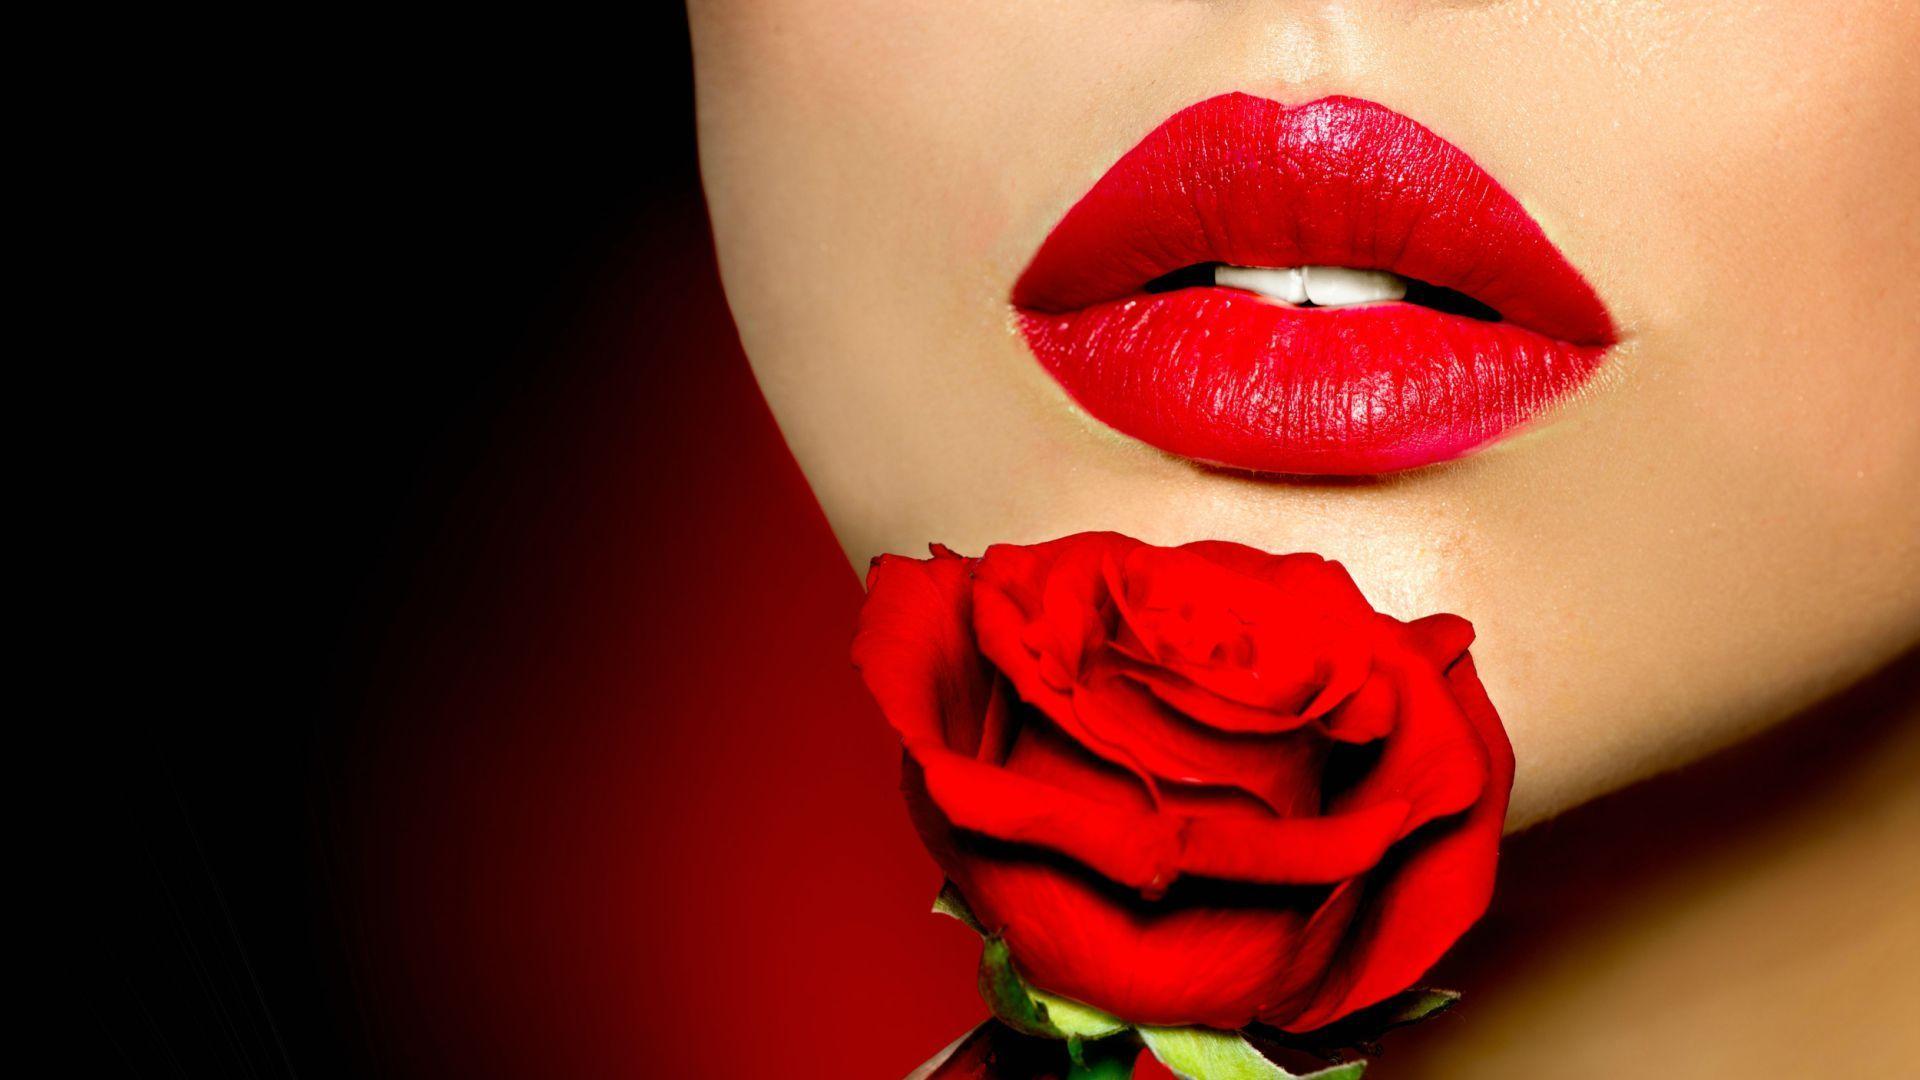 Wallpapers Desktop Hd of Beauty Red Lips With Rose.